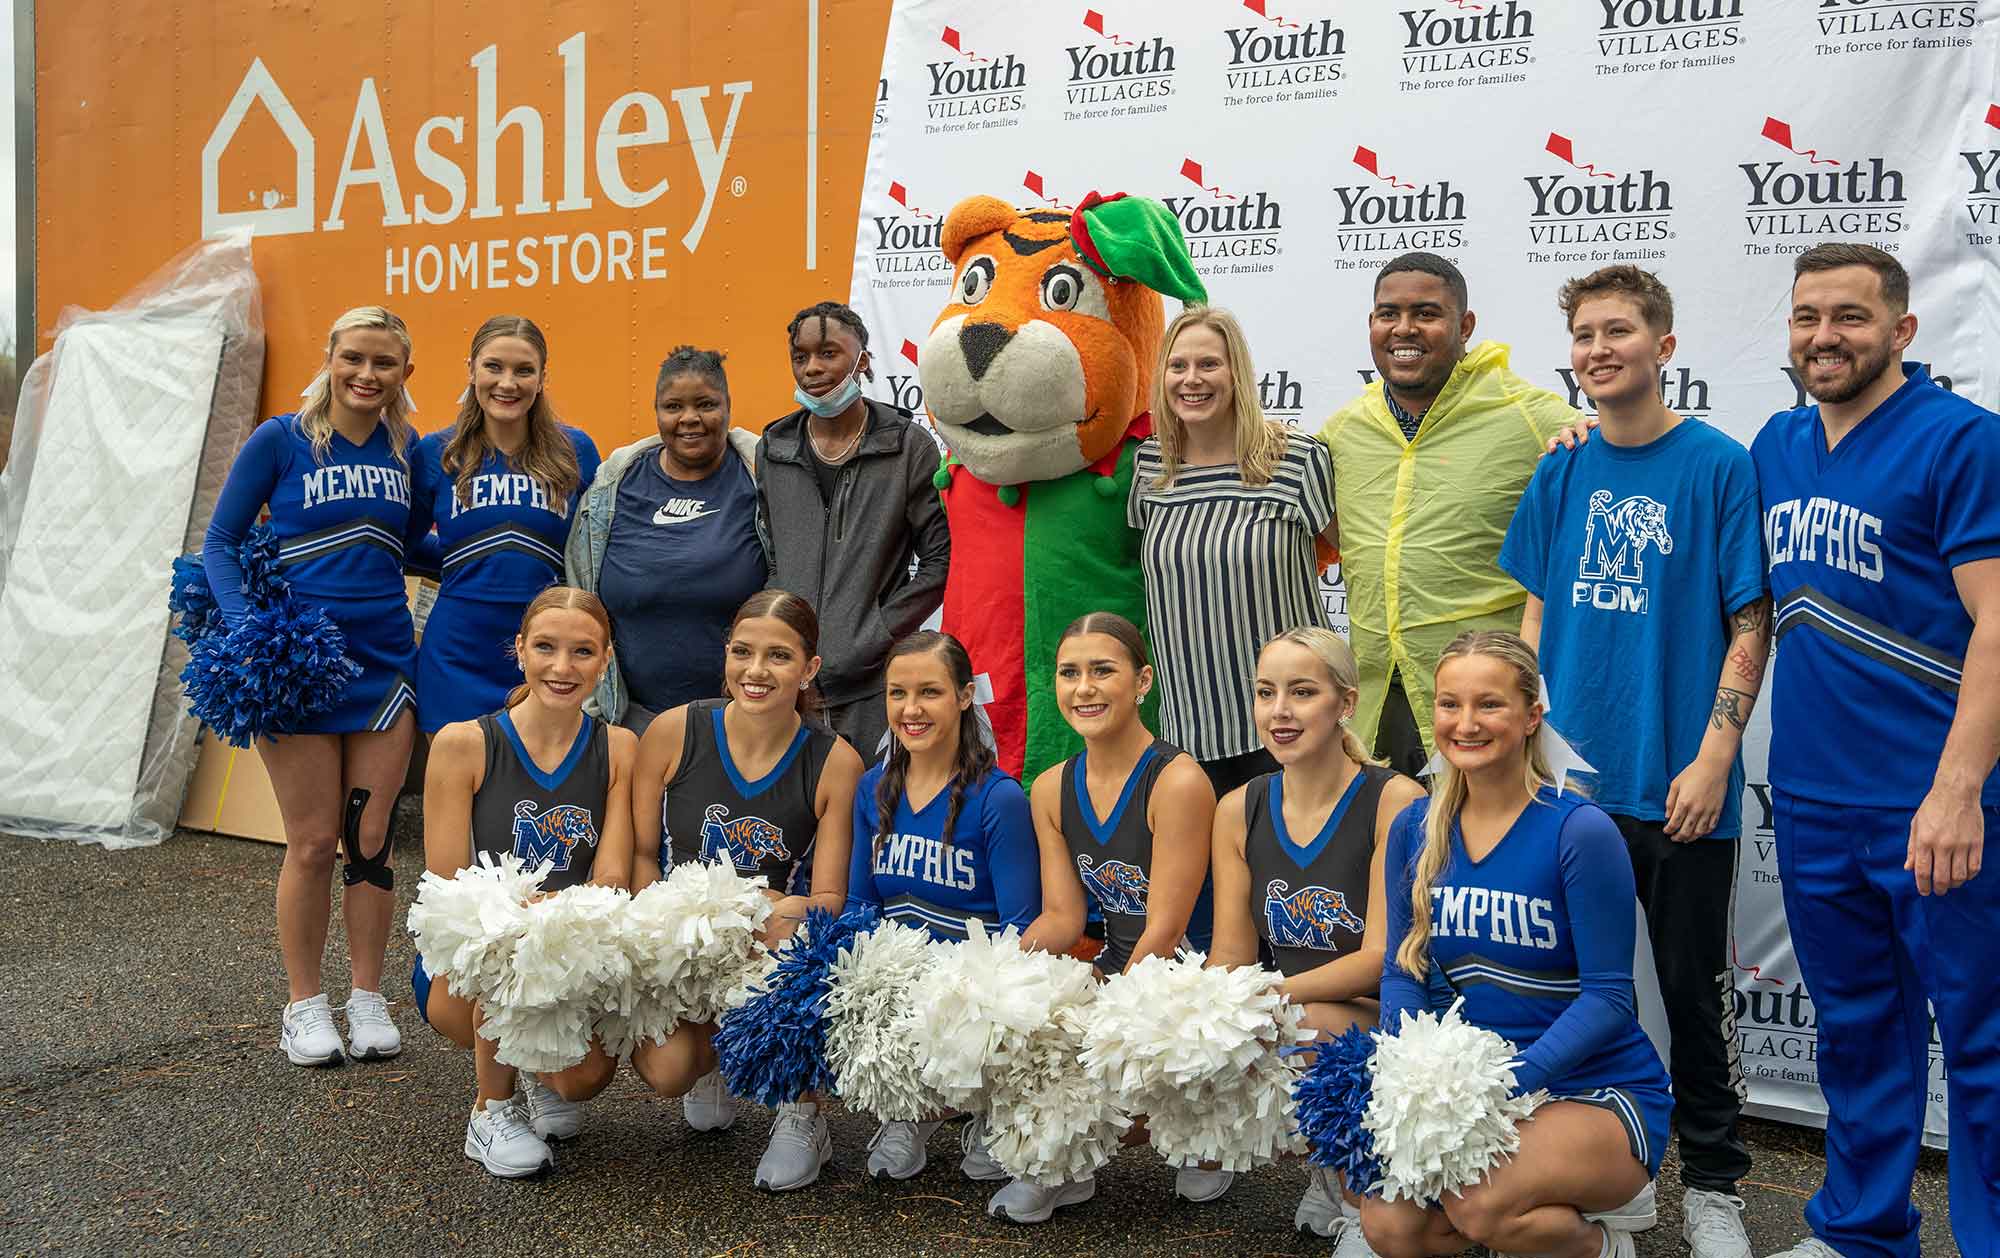 Youth Villages staff, University of Memphis Cheer team, and Intercept family in front of Ashley Home Furniture truck